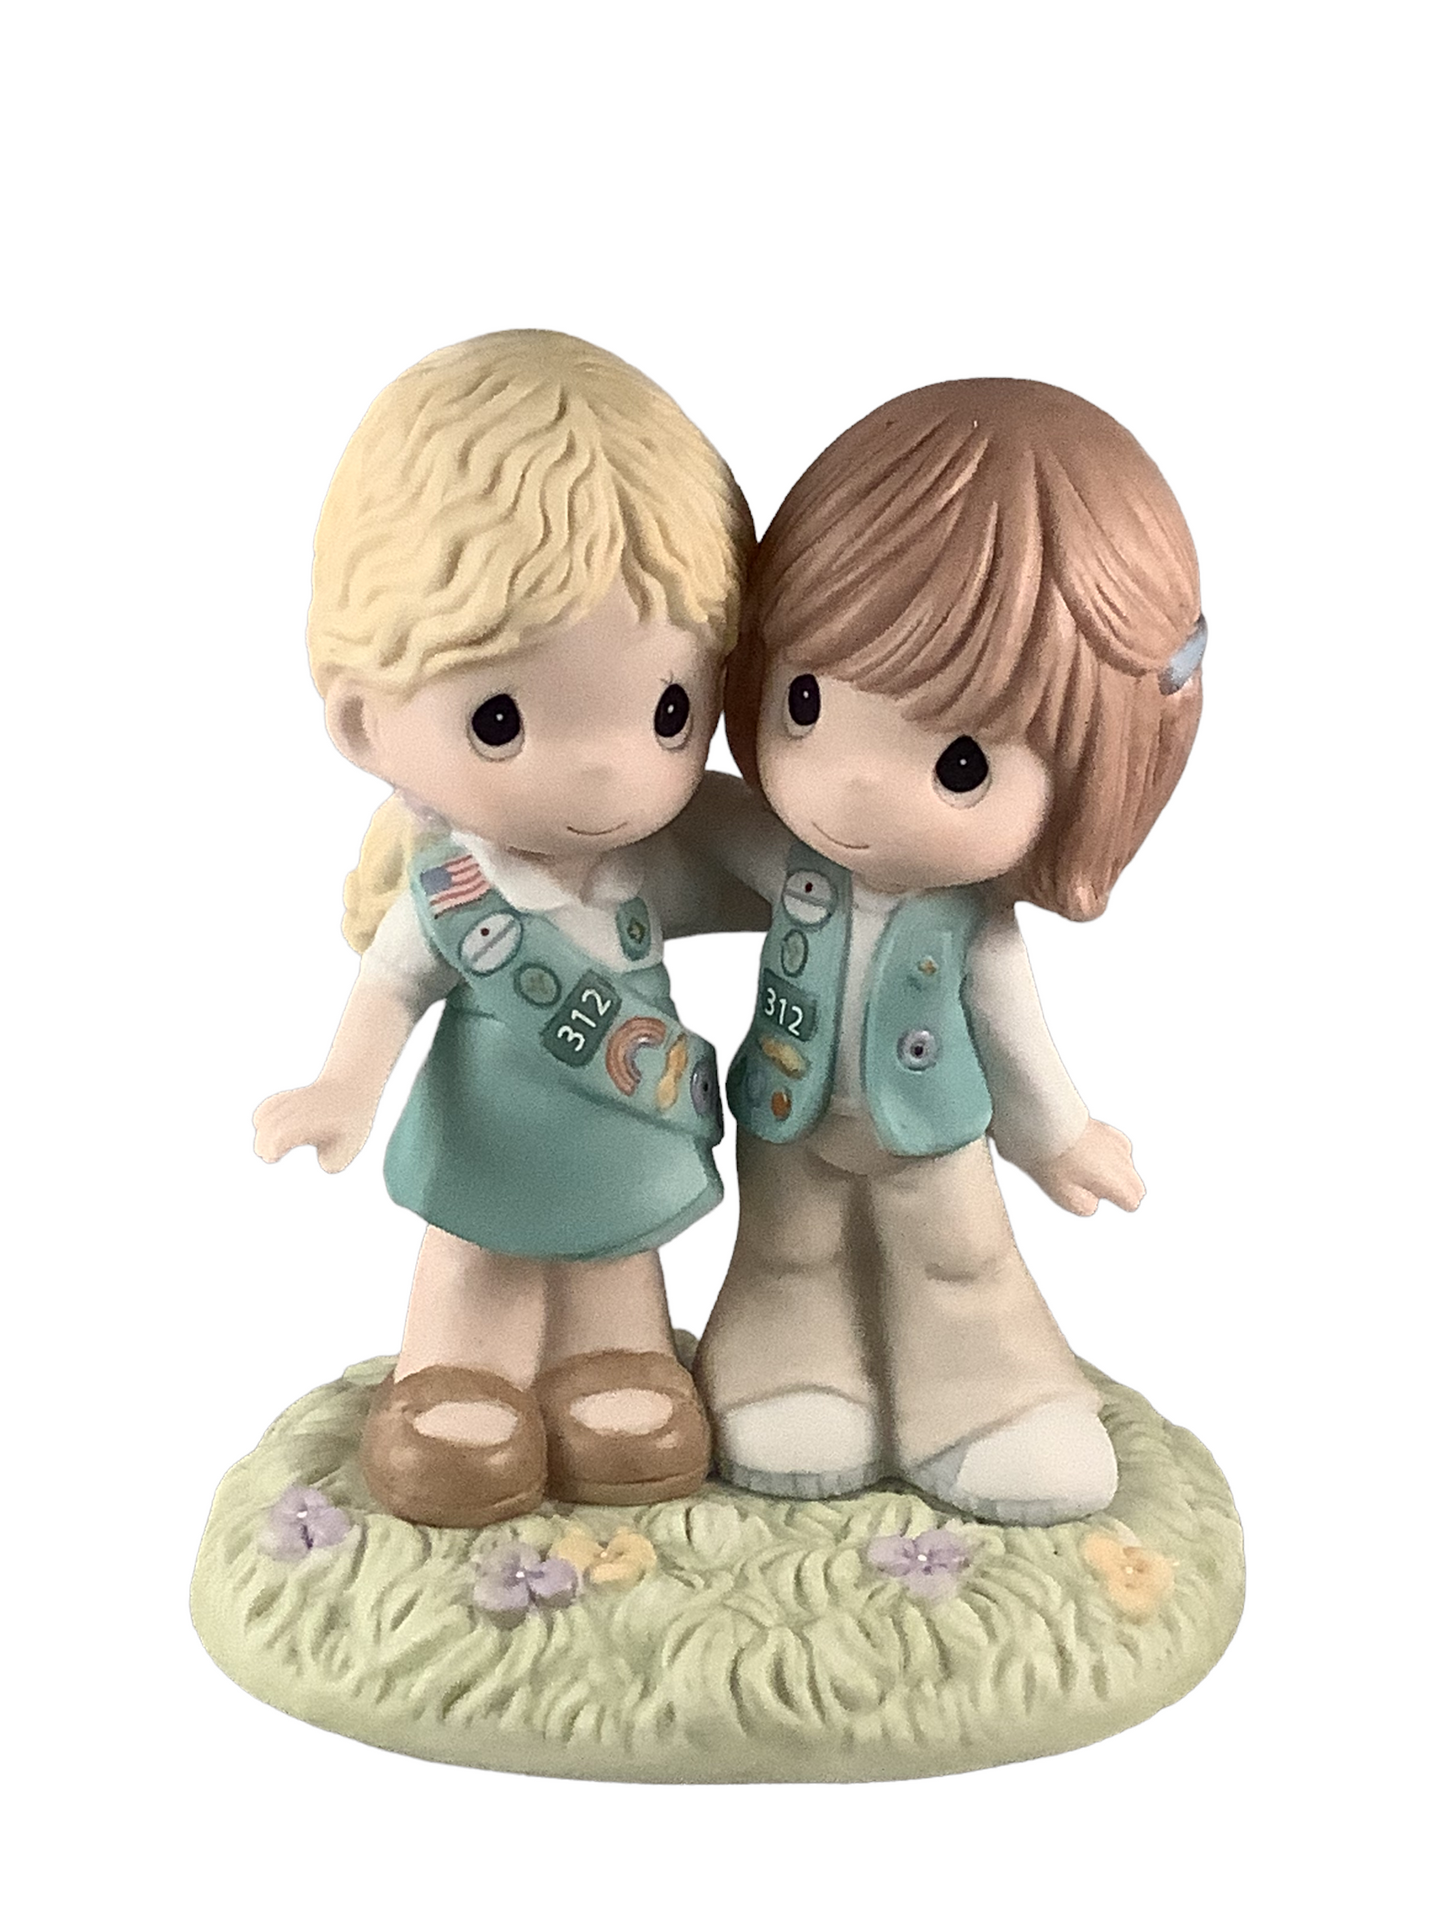 Girl Scouting Brings Friends Together - Precious Moment Figurine